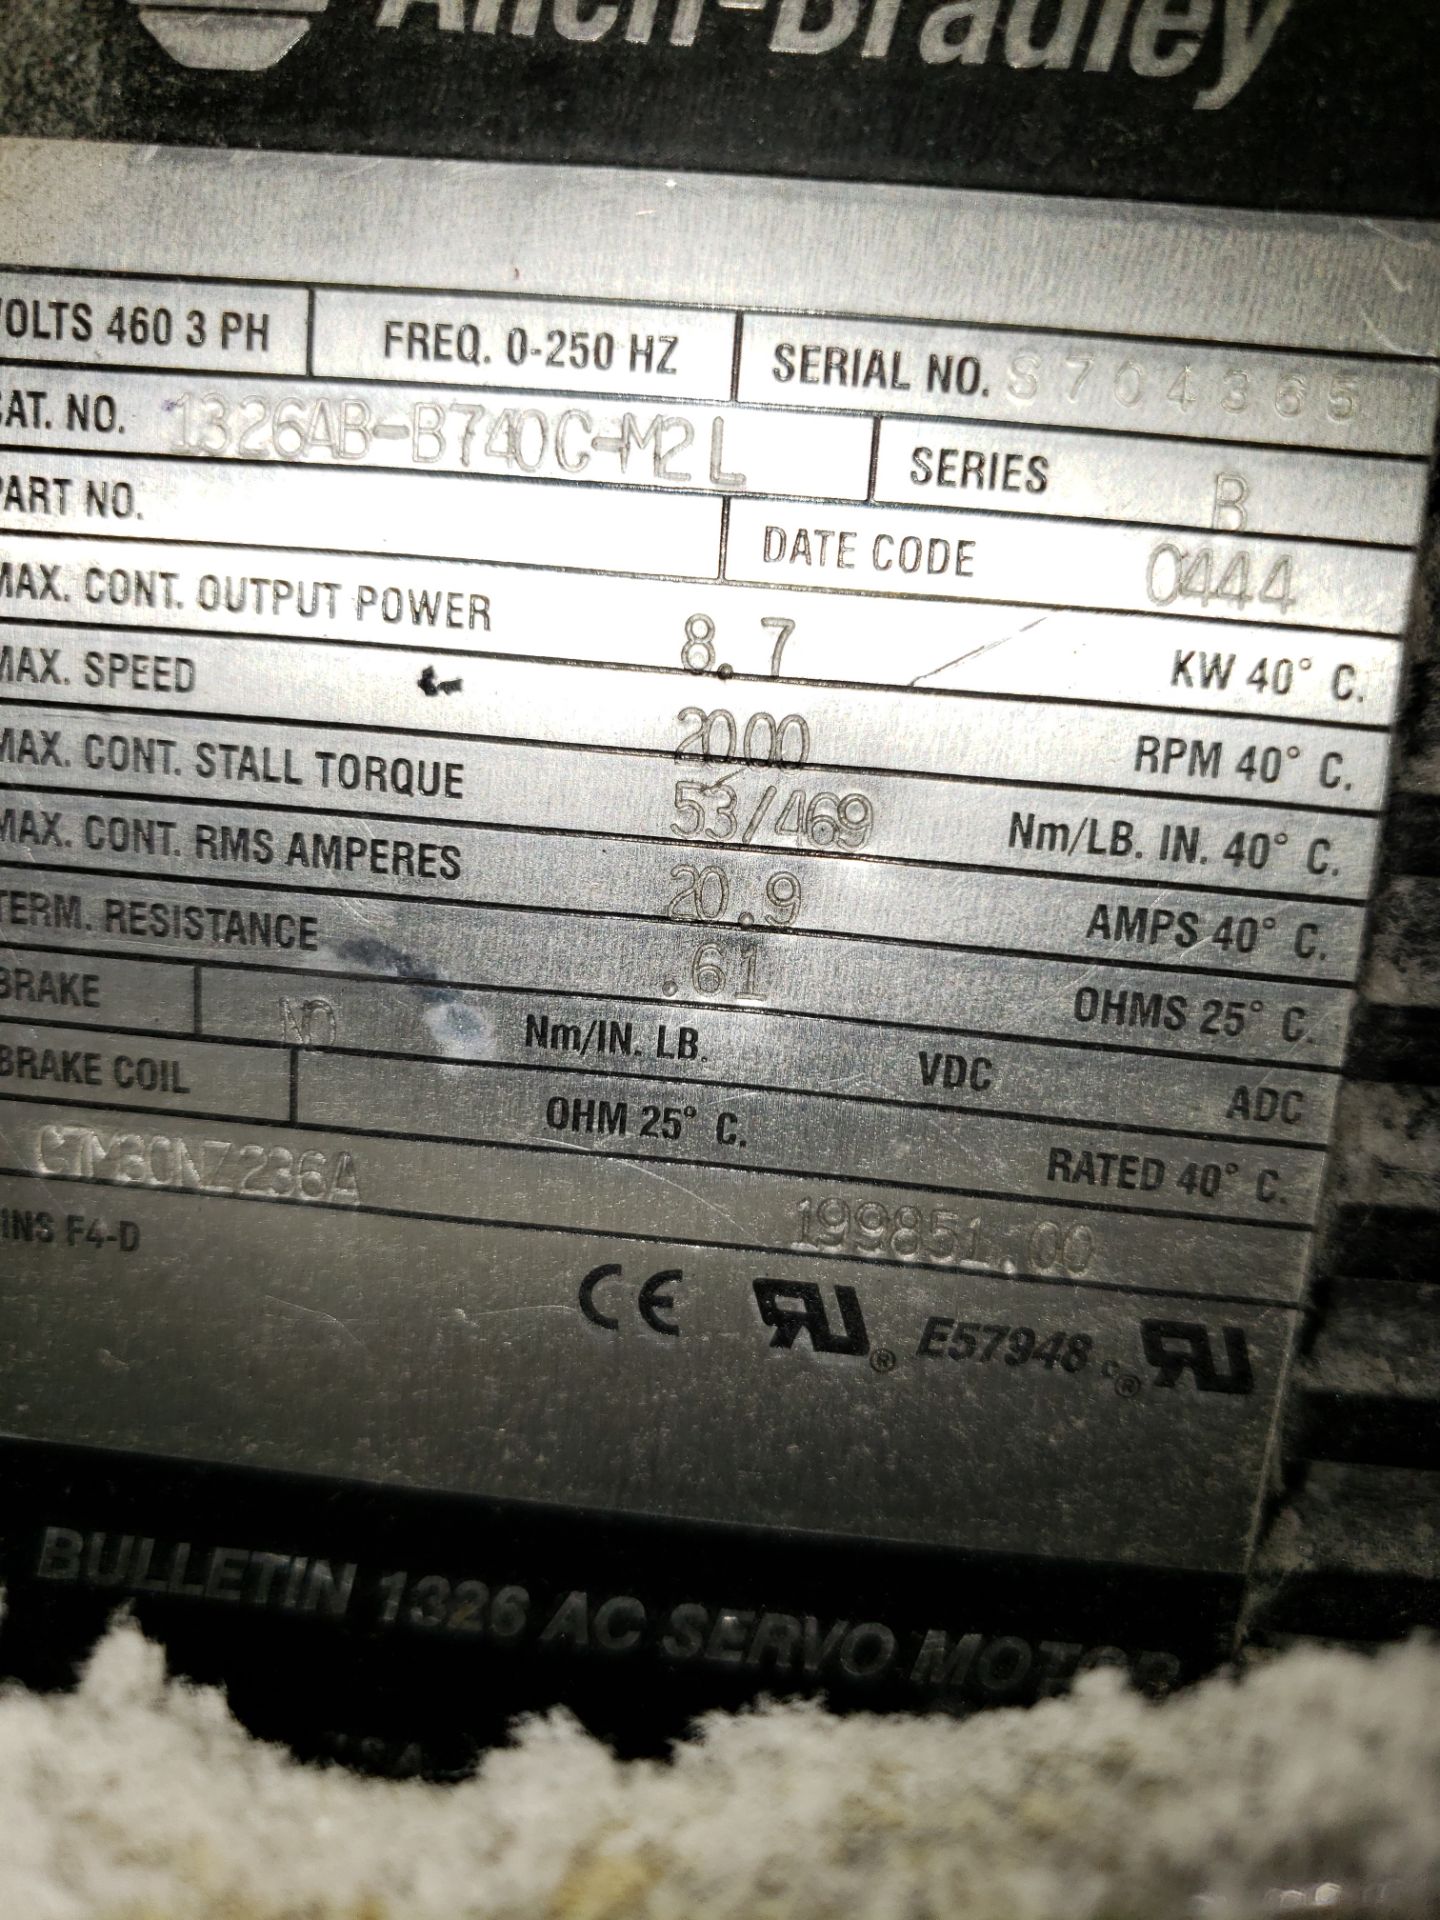 ALLEN BRADLEY SERVO MOTORS, 7 TOTAL, A FEW DIFFERENT PART NUMBERS, NEED TO BE REMOVED  (H1 WINDER) - Image 6 of 9